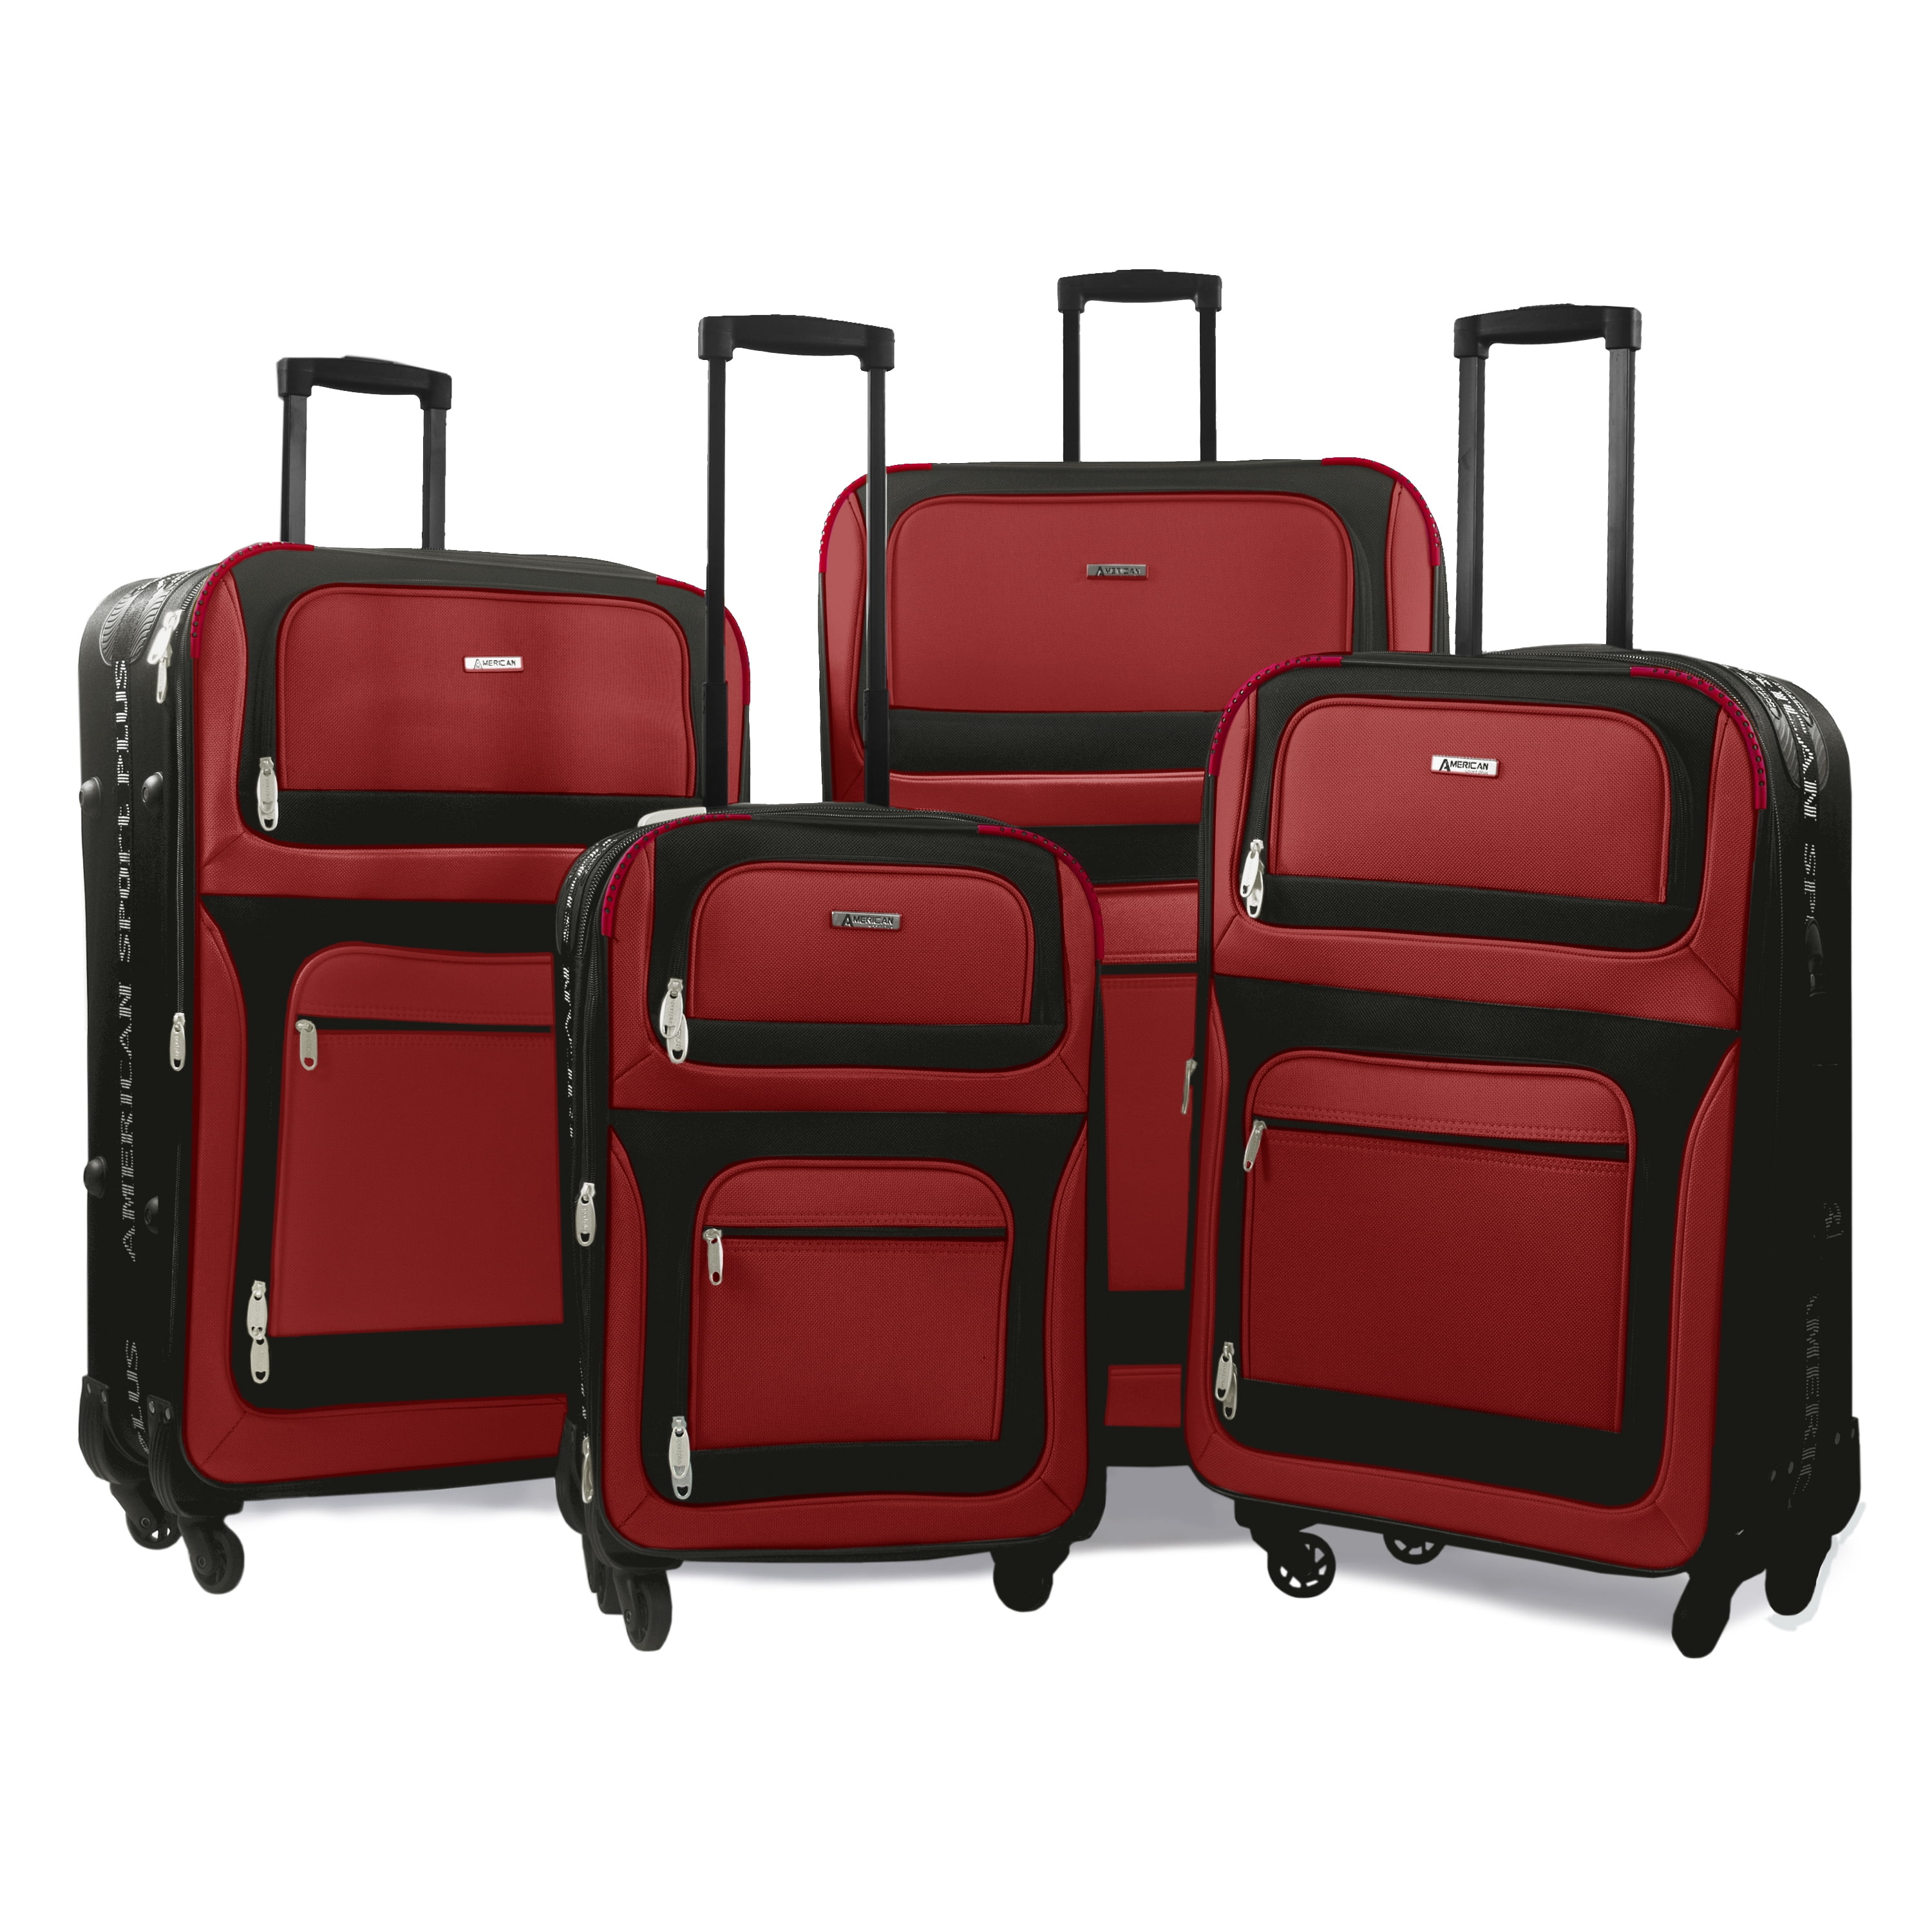 Jet 4-Piece Expandable Spinner Luggage Set, Black/Red - Walmart.com